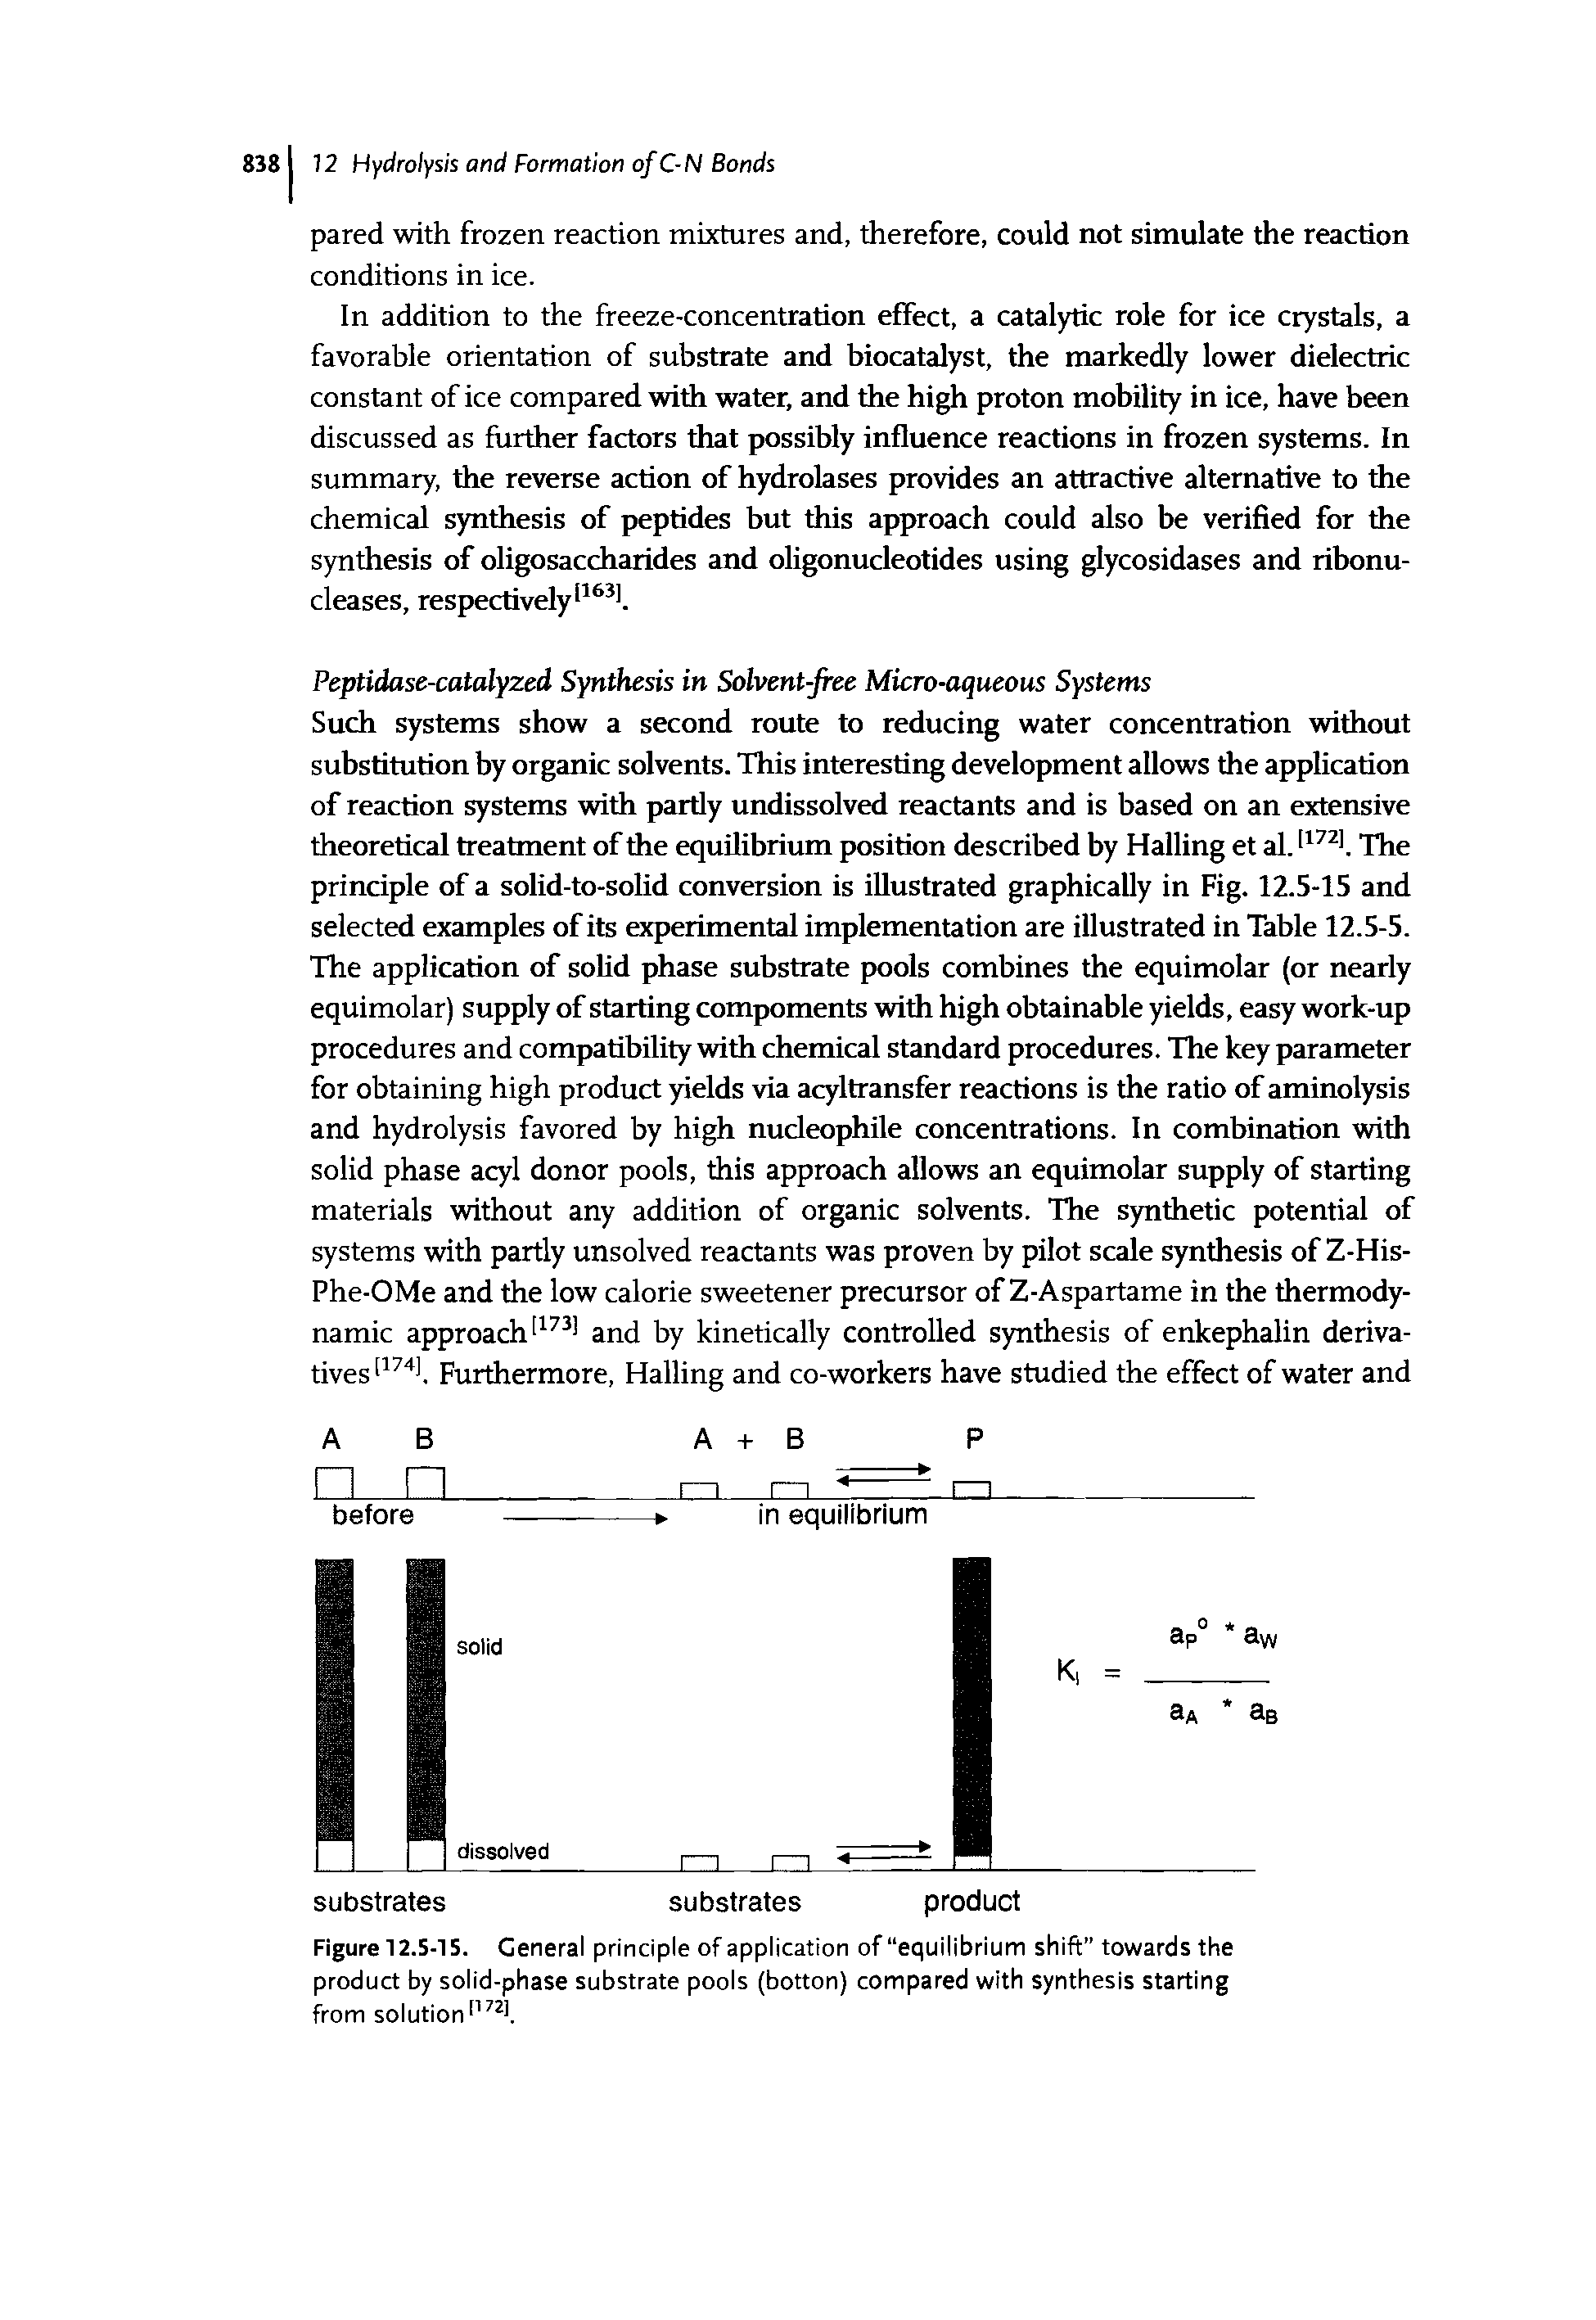 Figure 12.5-15. General principle of application of equilibrium shift towards the product by solid-phase substrate pools (botton) compared with synthesis starting from solution11721.